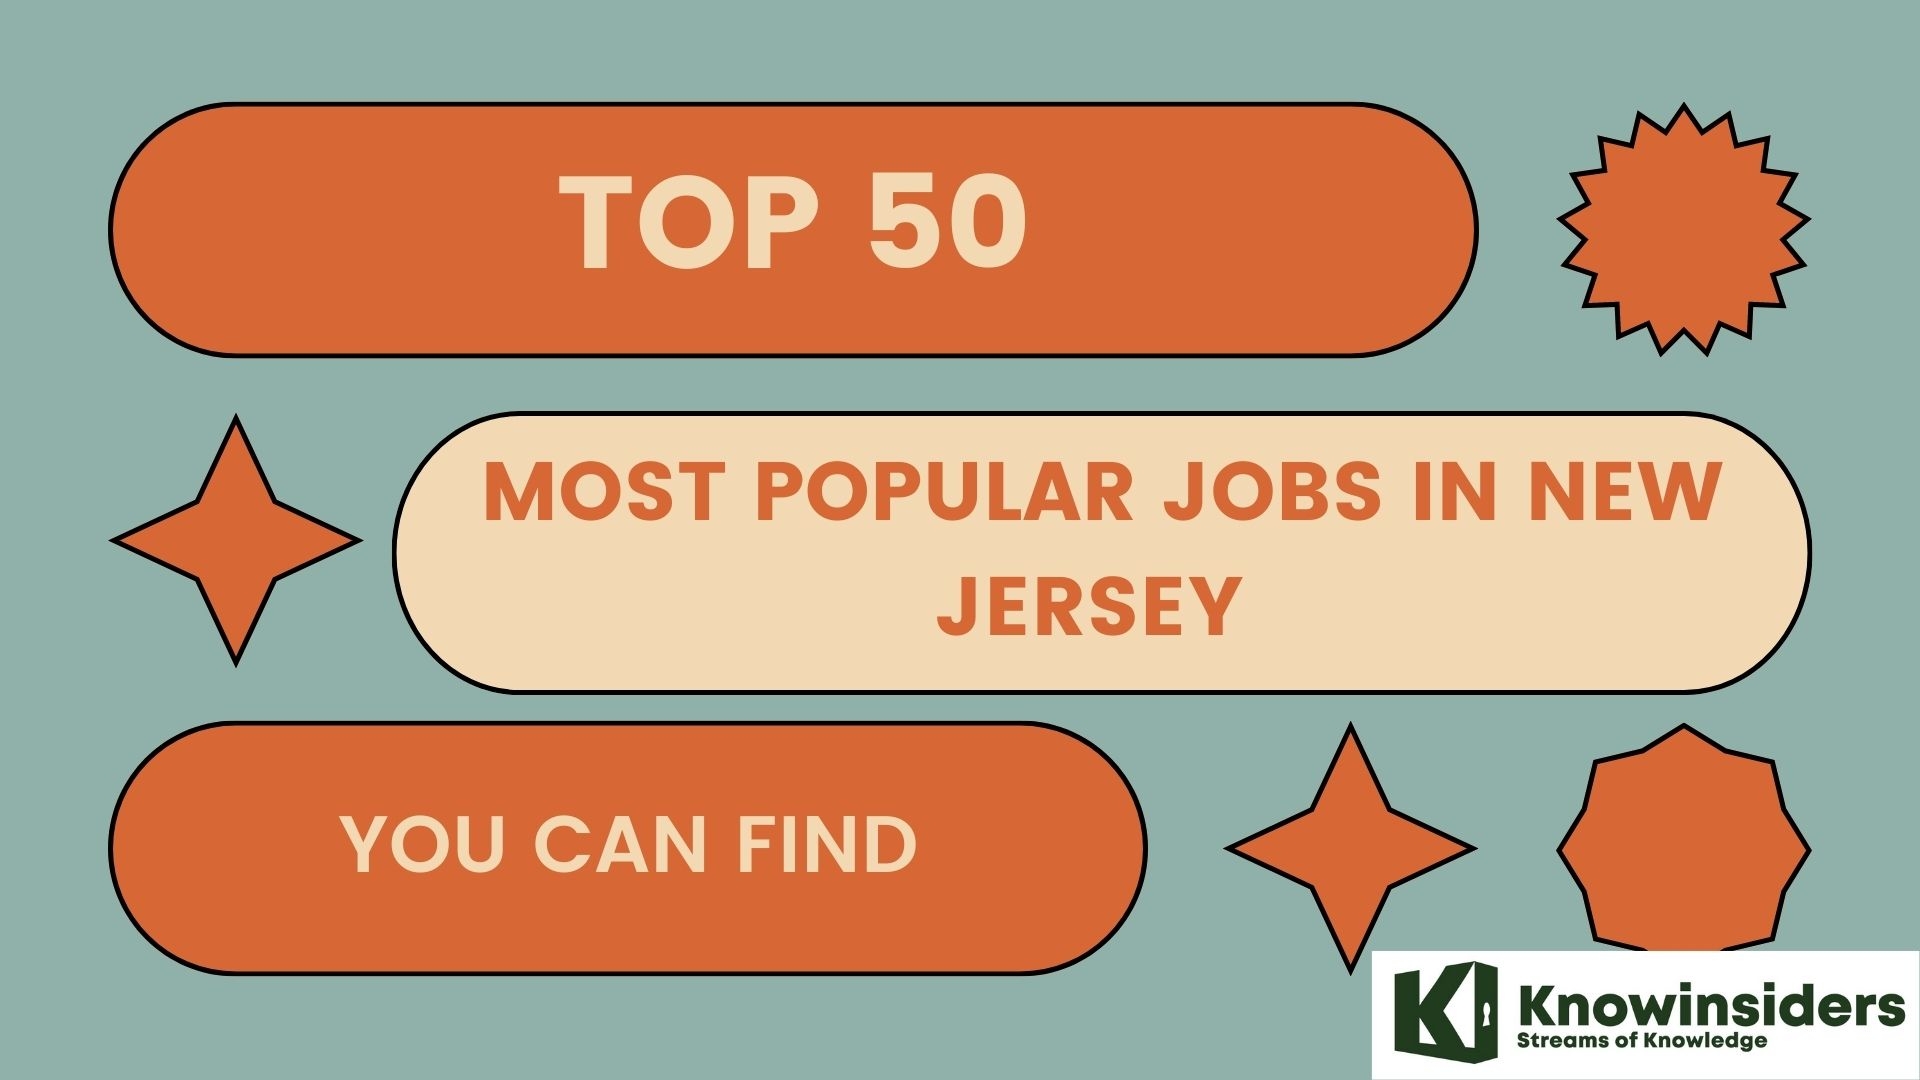 Top 50 Most Popular Jobs and Salaries In New Jersey That You Can Find